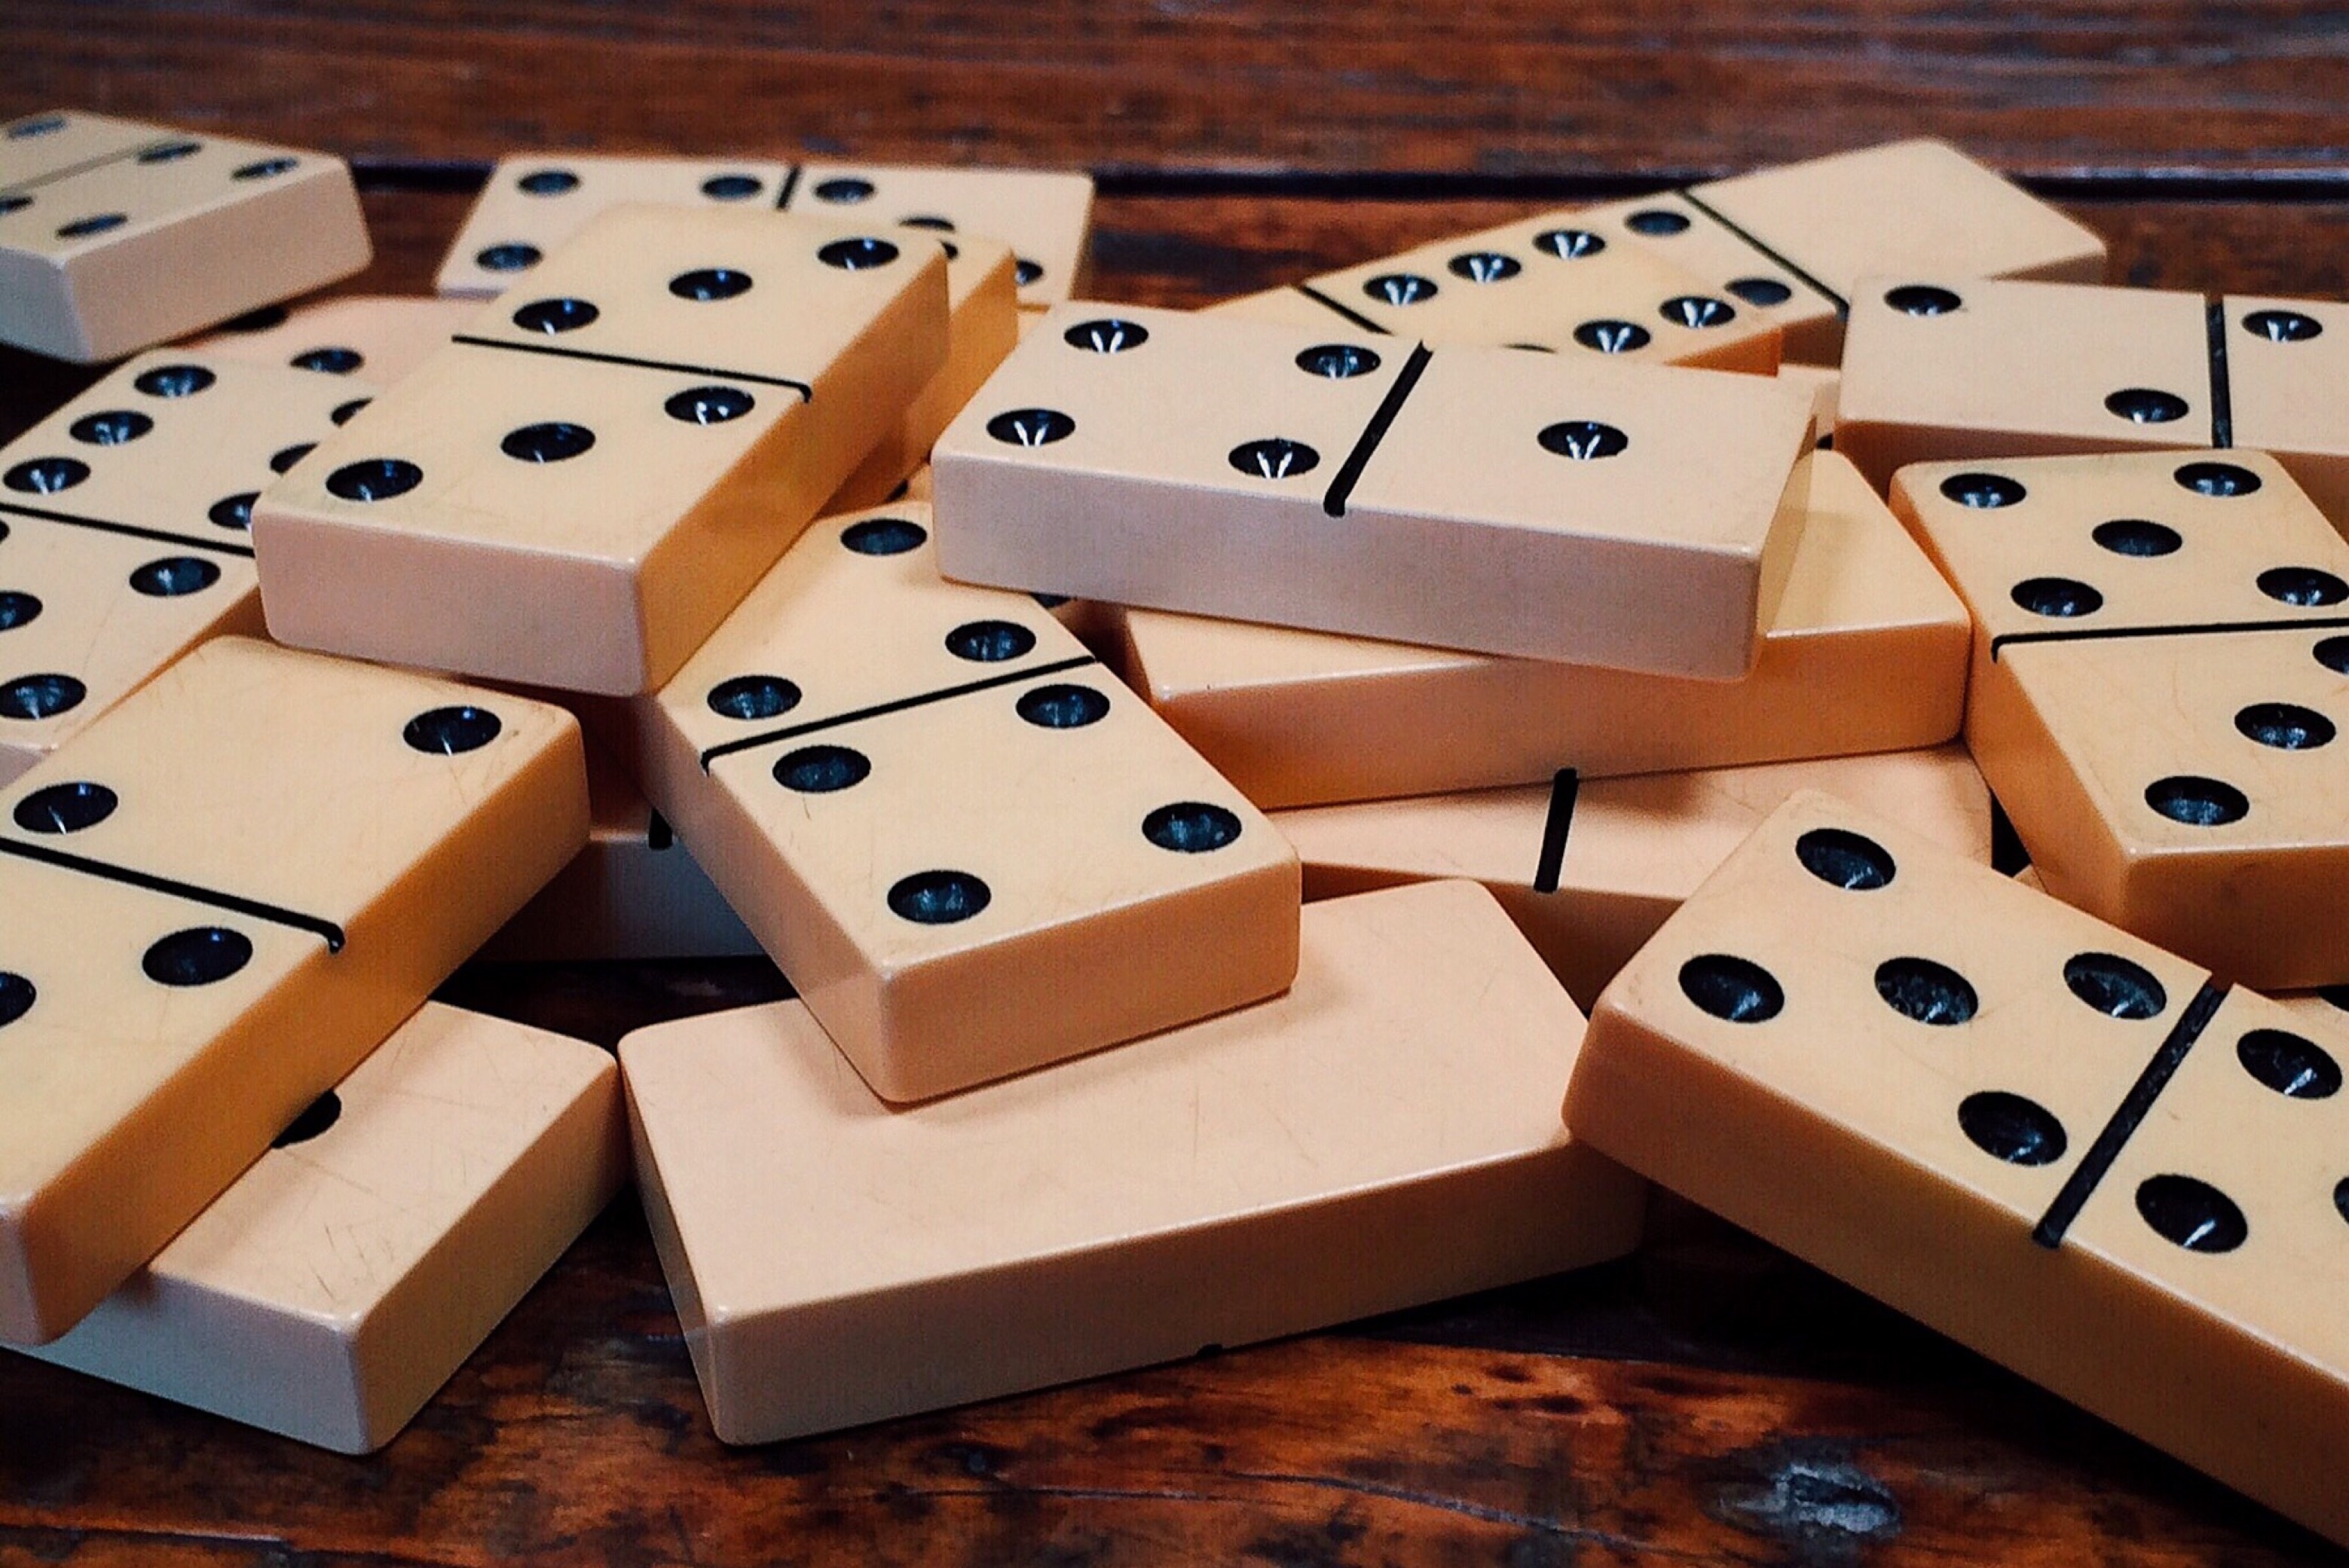 Dominoes: Small game blocks on a wooden table, A popular competitive game. 3120x2090 HD Wallpaper.